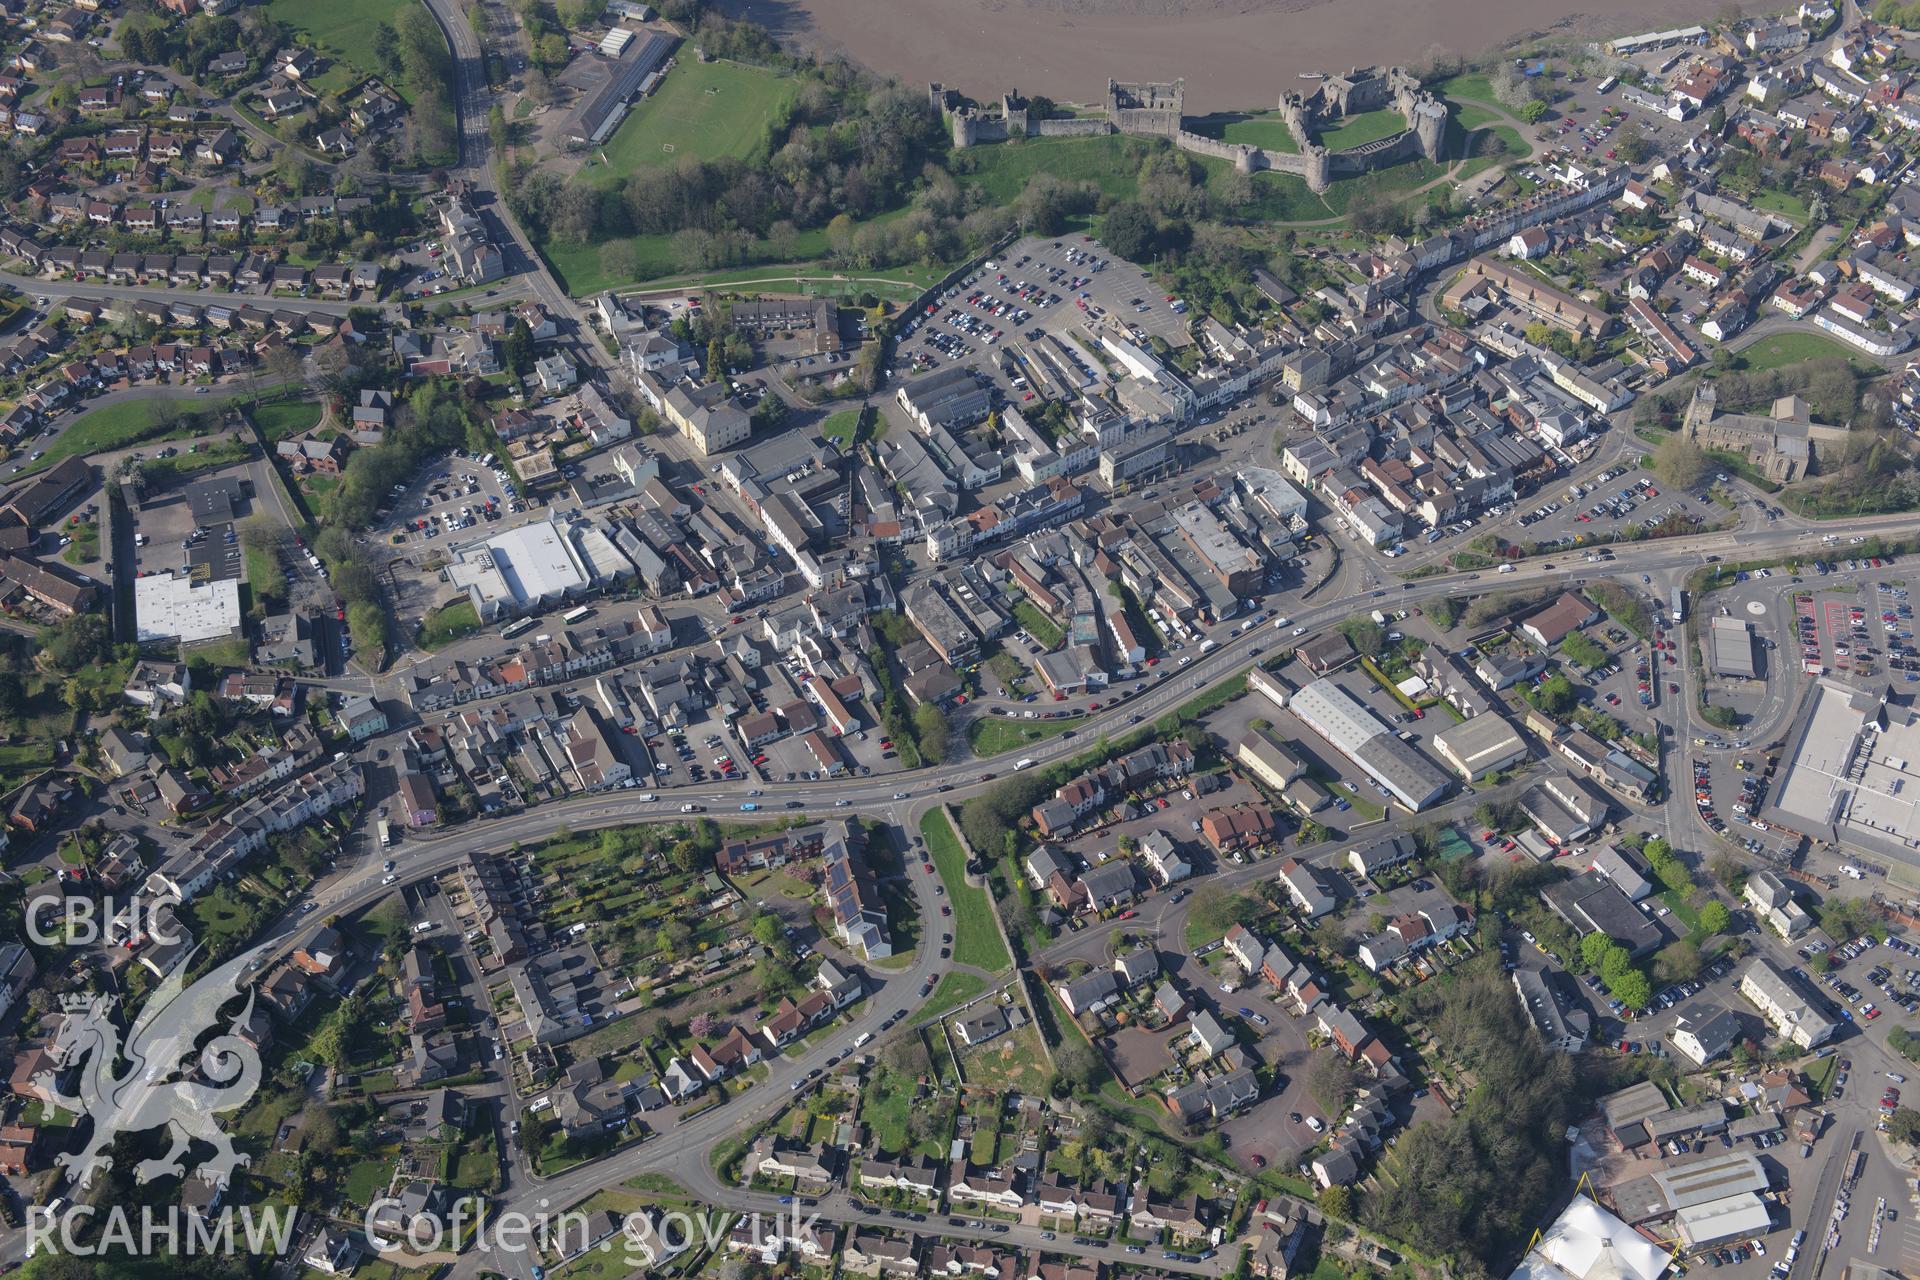 Chepstow including views of the Castle, St. Mary's Church, the Old Almshouses and the Palace Theatre. Oblique aerial photograph taken during the Royal Commission's programme of archaeological aerial reconnaissance by Toby Driver on 21st April 2015.